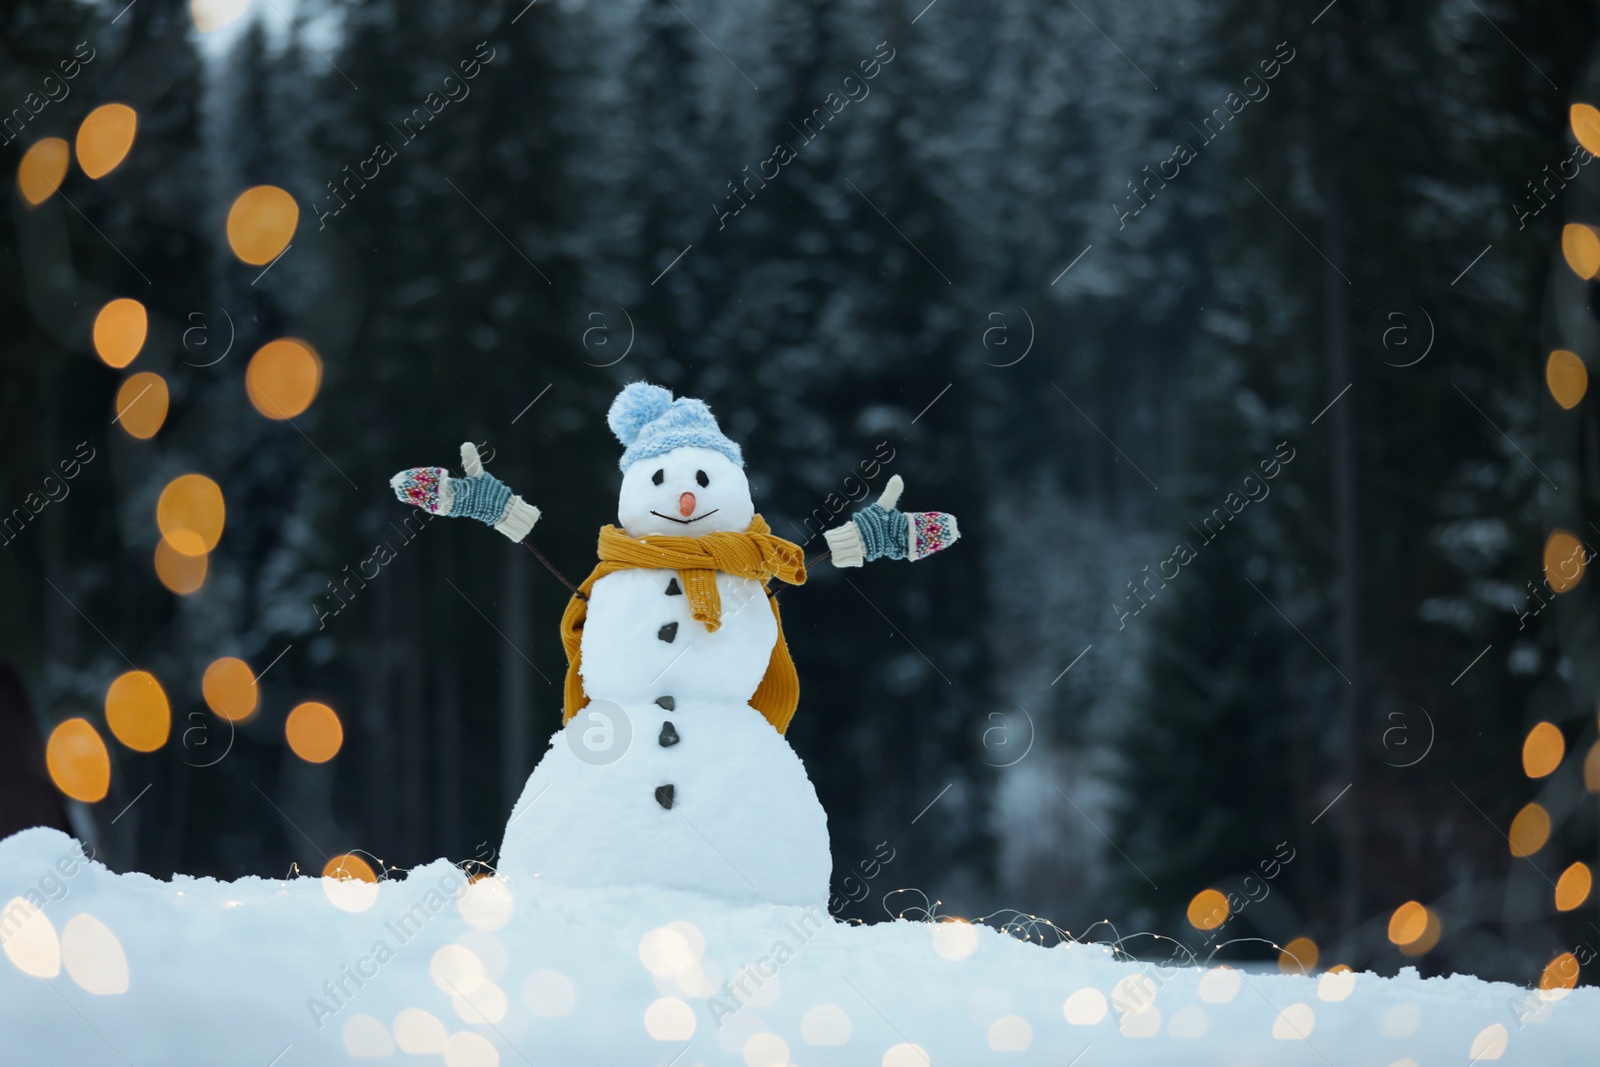 Photo of Adorable smiling snowman with Christmas lights outdoors on winter day